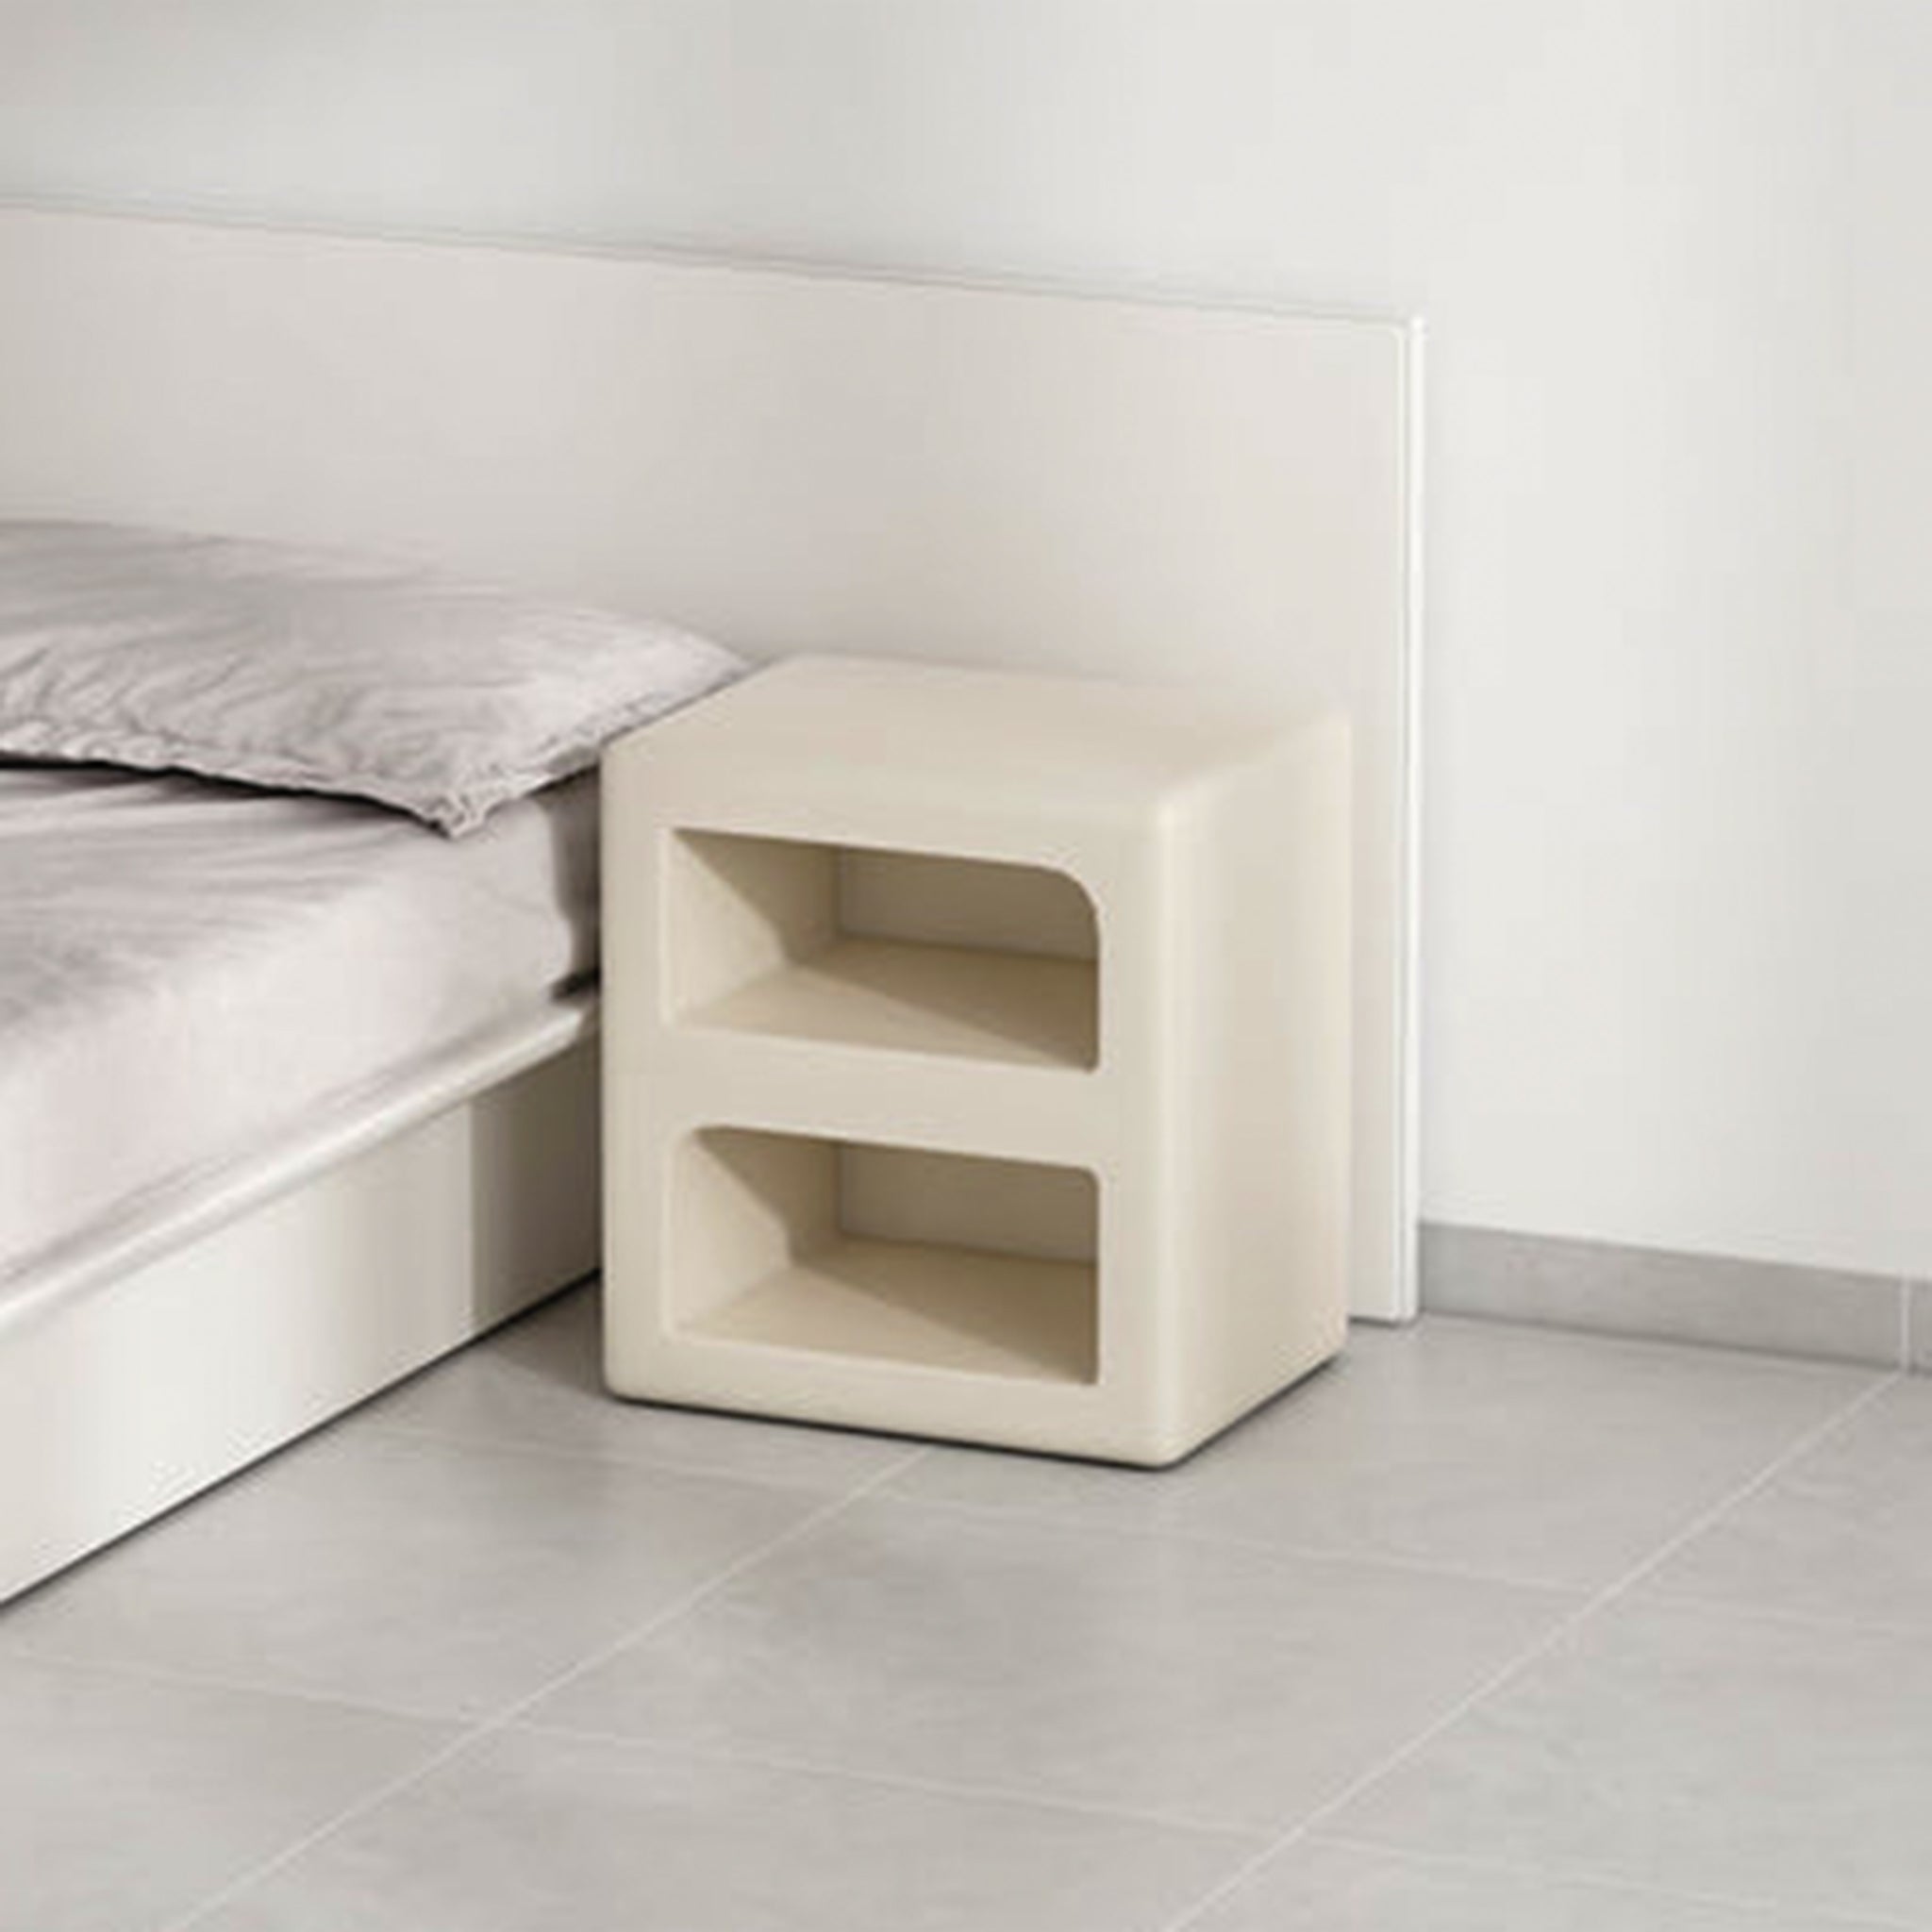 Side table with a built-in magazine rack for keeping reading materials organized.